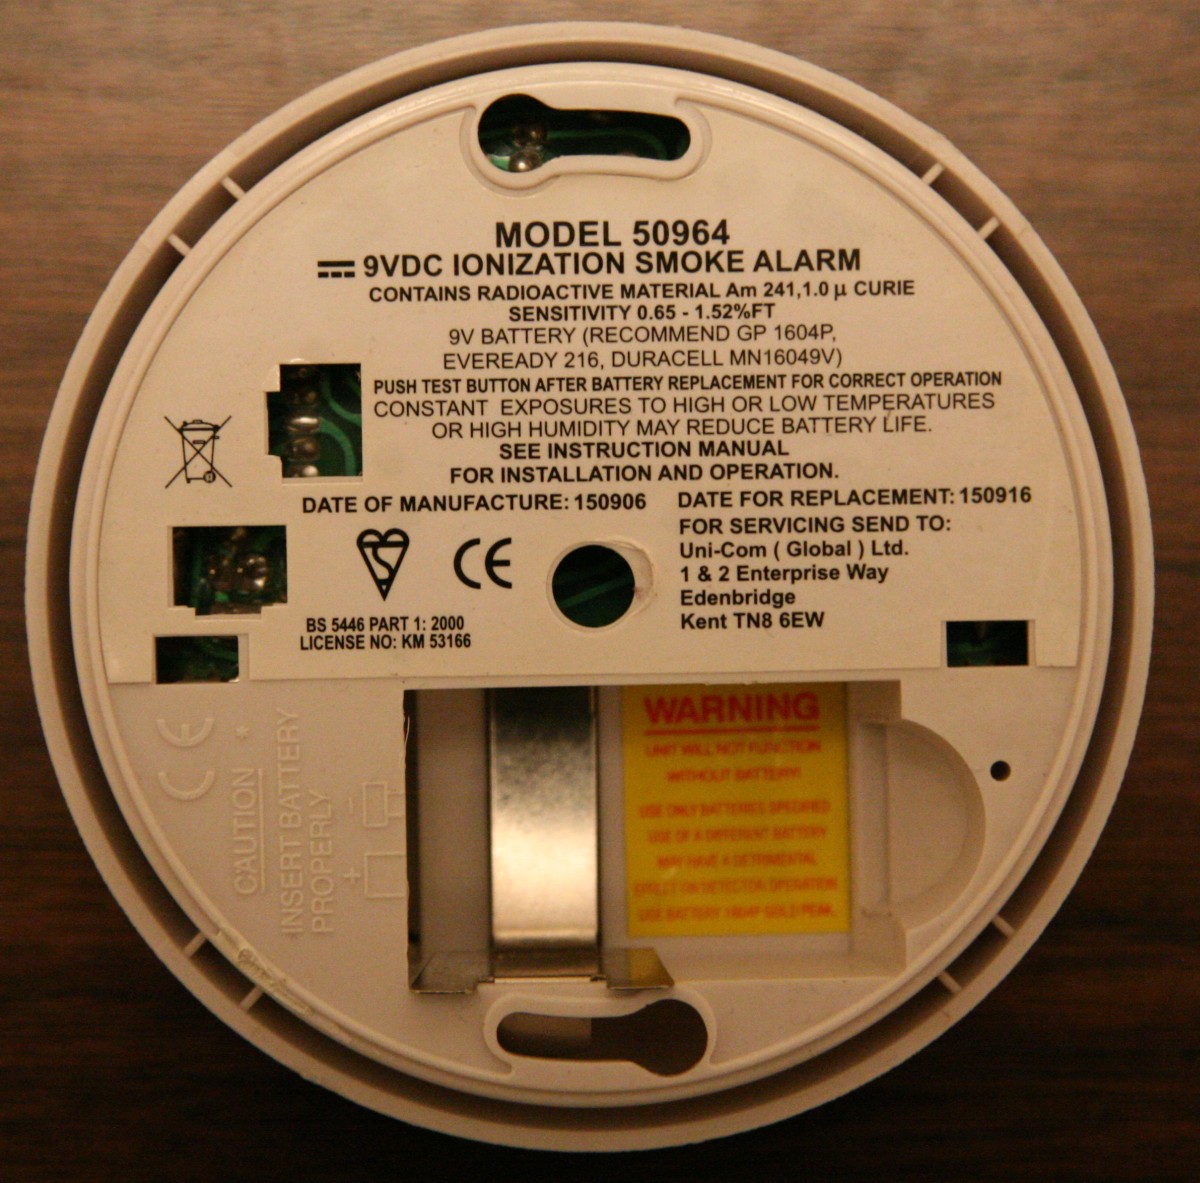 Geek Thoughts: Recycling Smoke Alarms